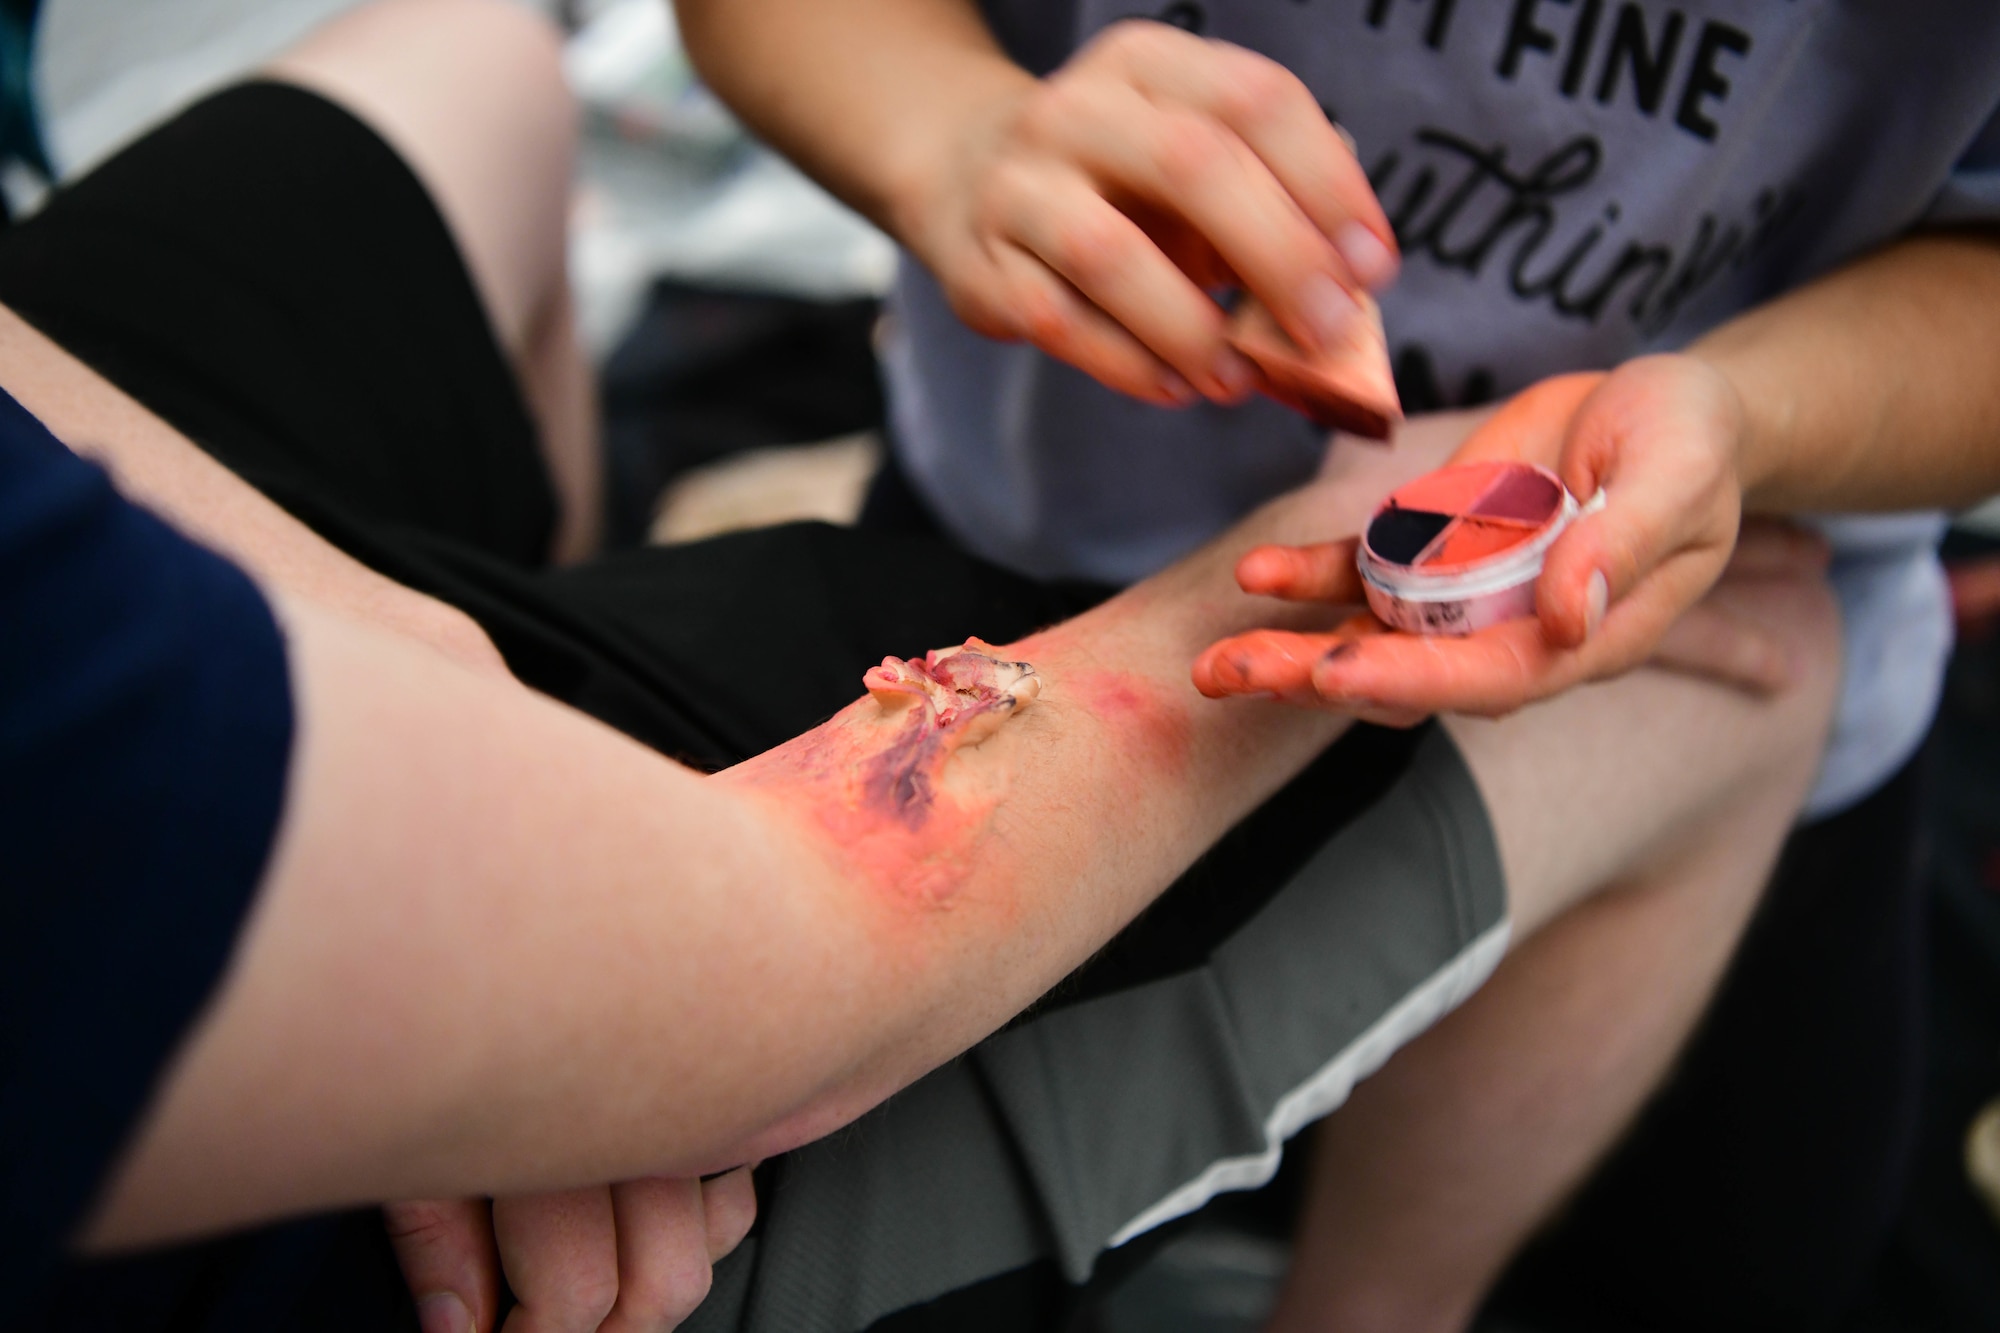 An Airman applies simulated wound makeup to another Airman’s arm during exercise Ready Eagle Aug. 6, 2021, at Beale Air Force Base, California.